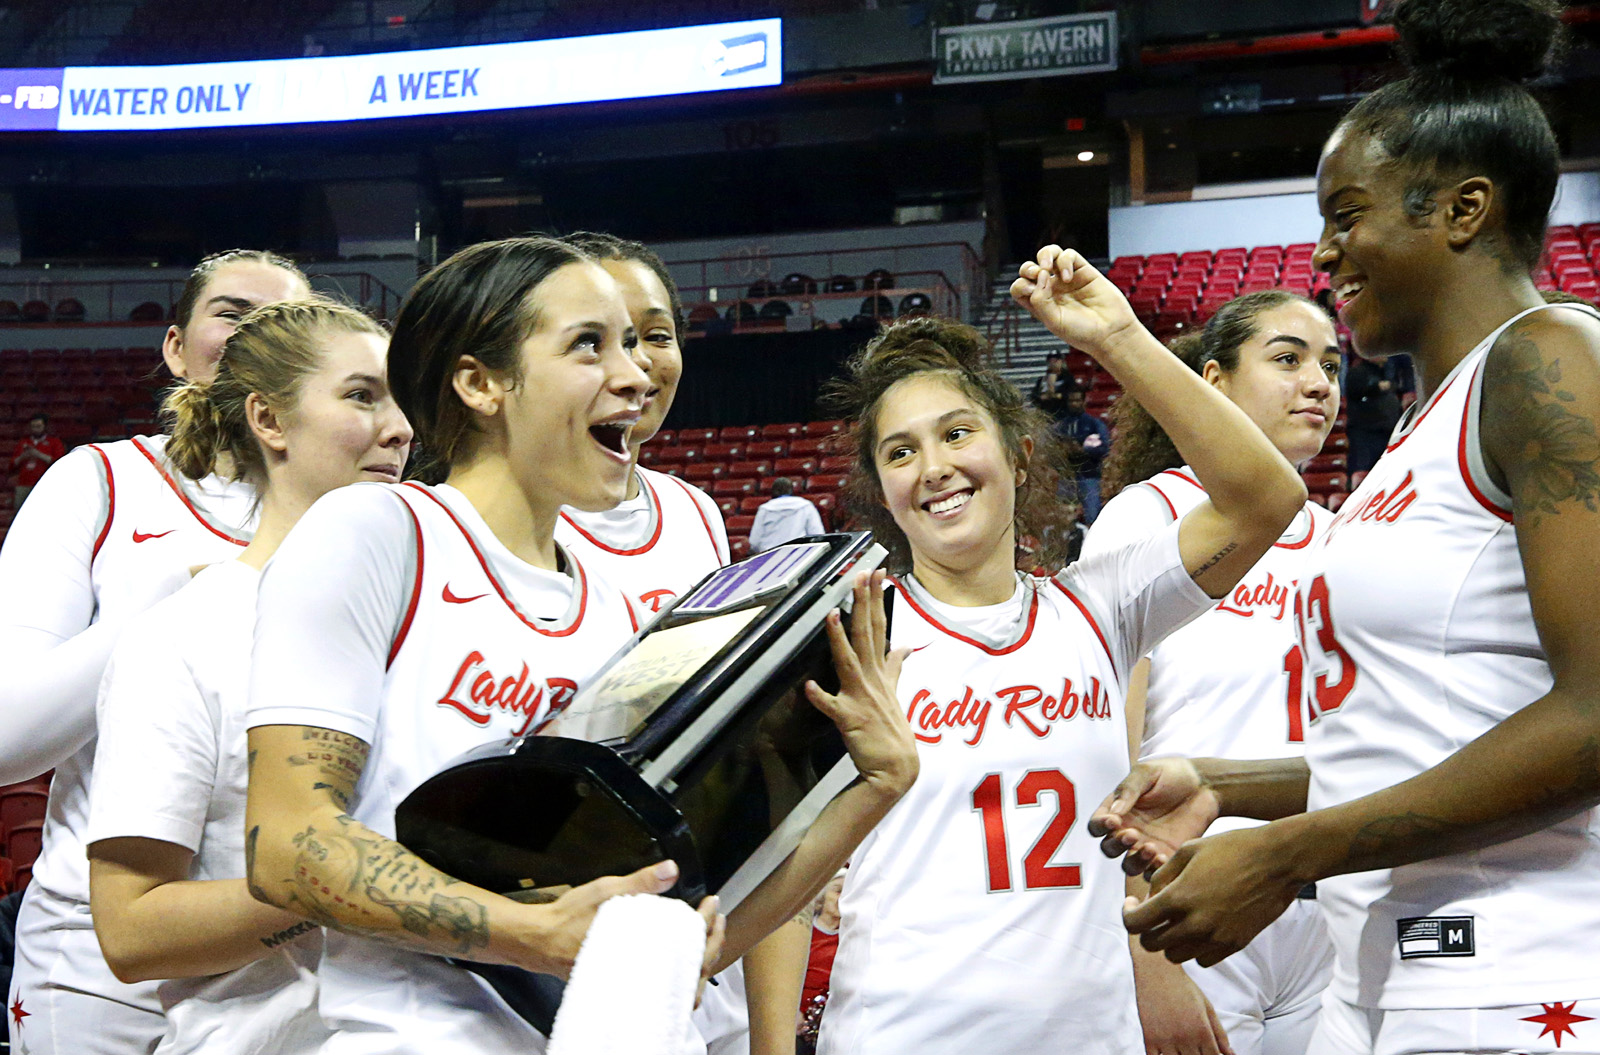 Champs again: UNLV women win 16th straight, capture Mountain West title ...